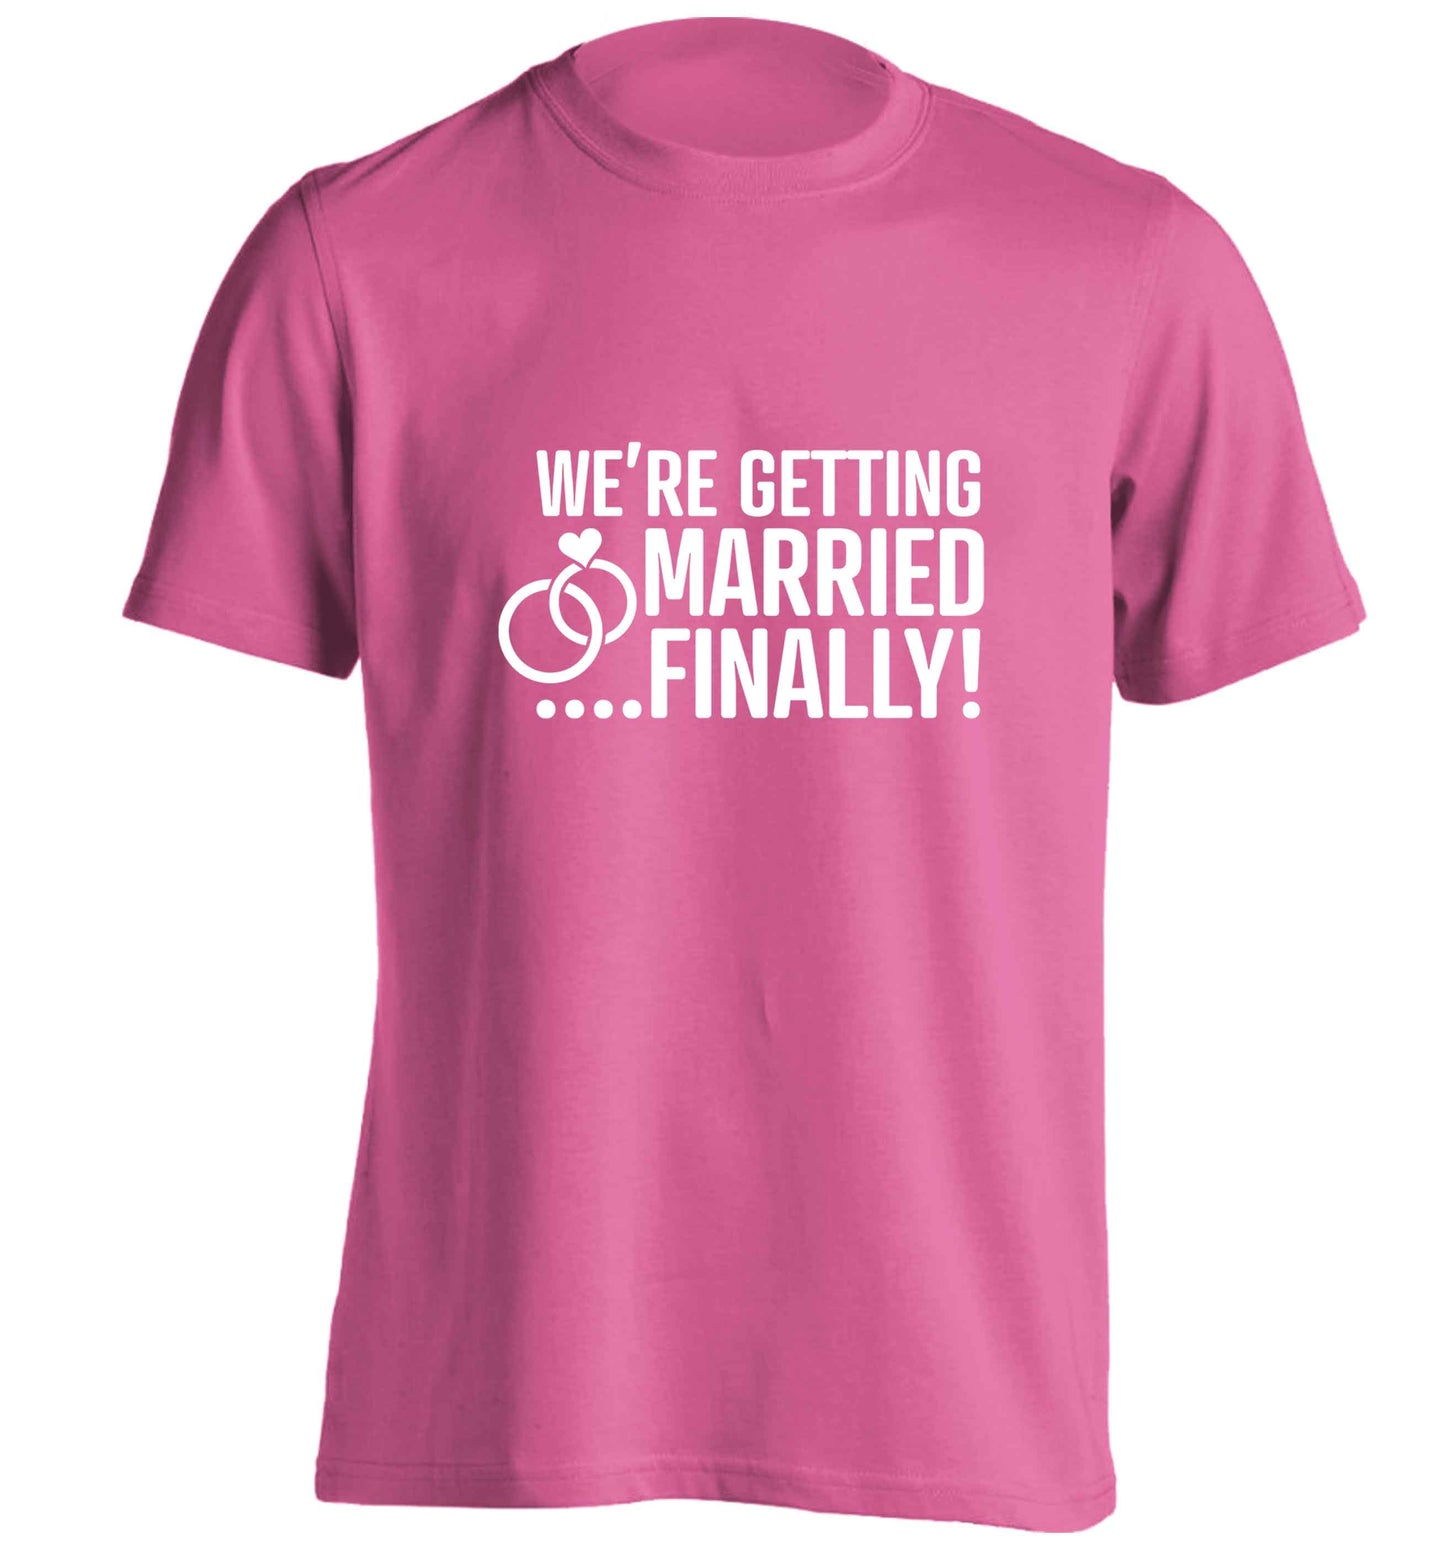 It's been a long wait but it's finally happening! Let everyone know you're celebrating your big day soon! adults unisex pink Tshirt 2XL